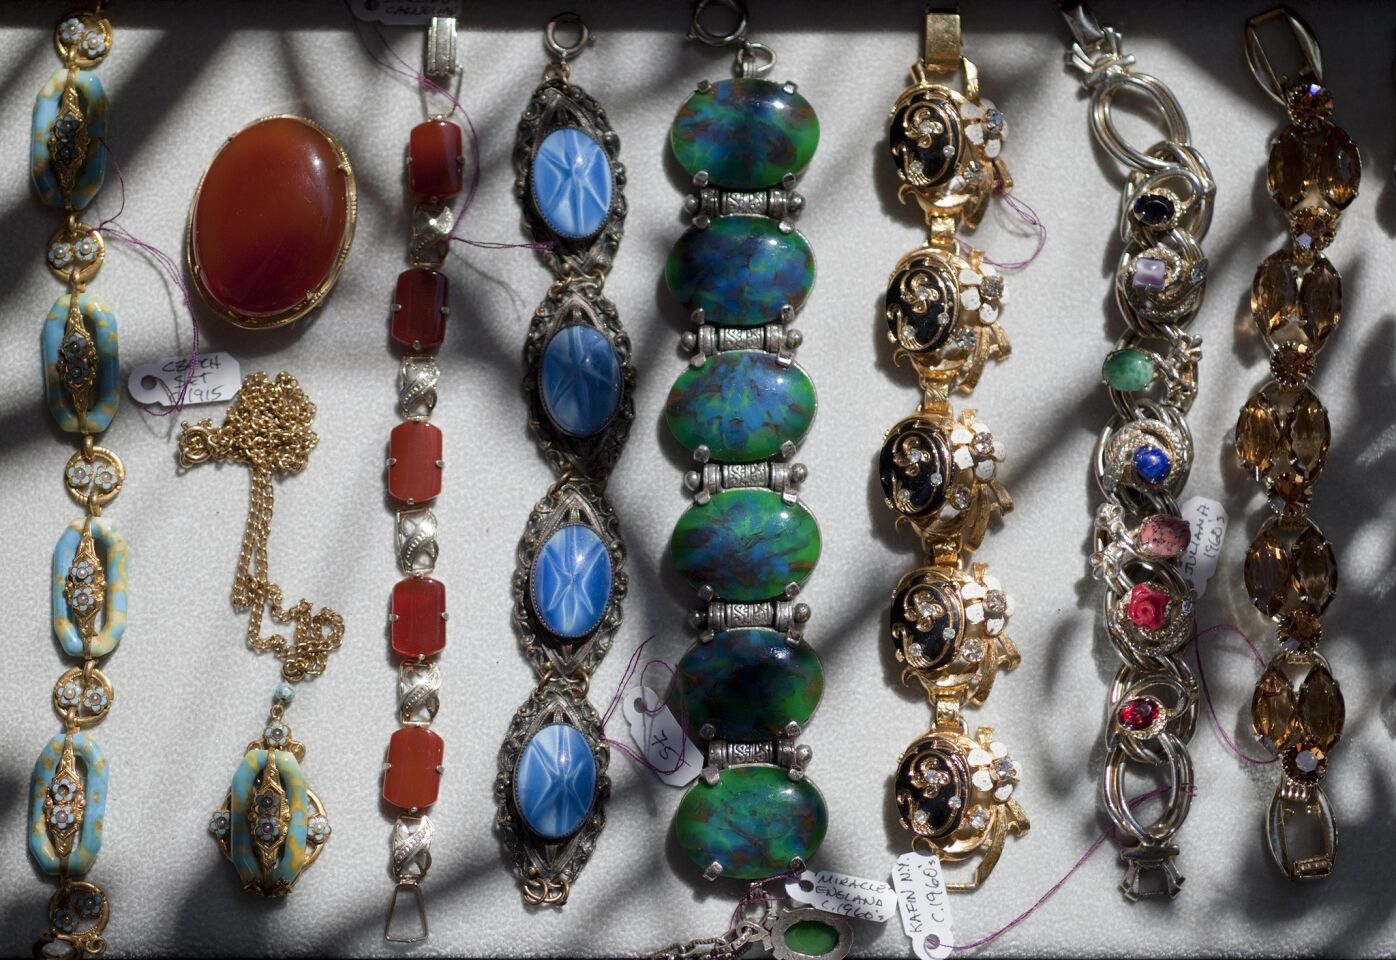 A selection of Neil Zevnik's vintage costume jewelry, with pieces that date from 1915 to the 1980s.